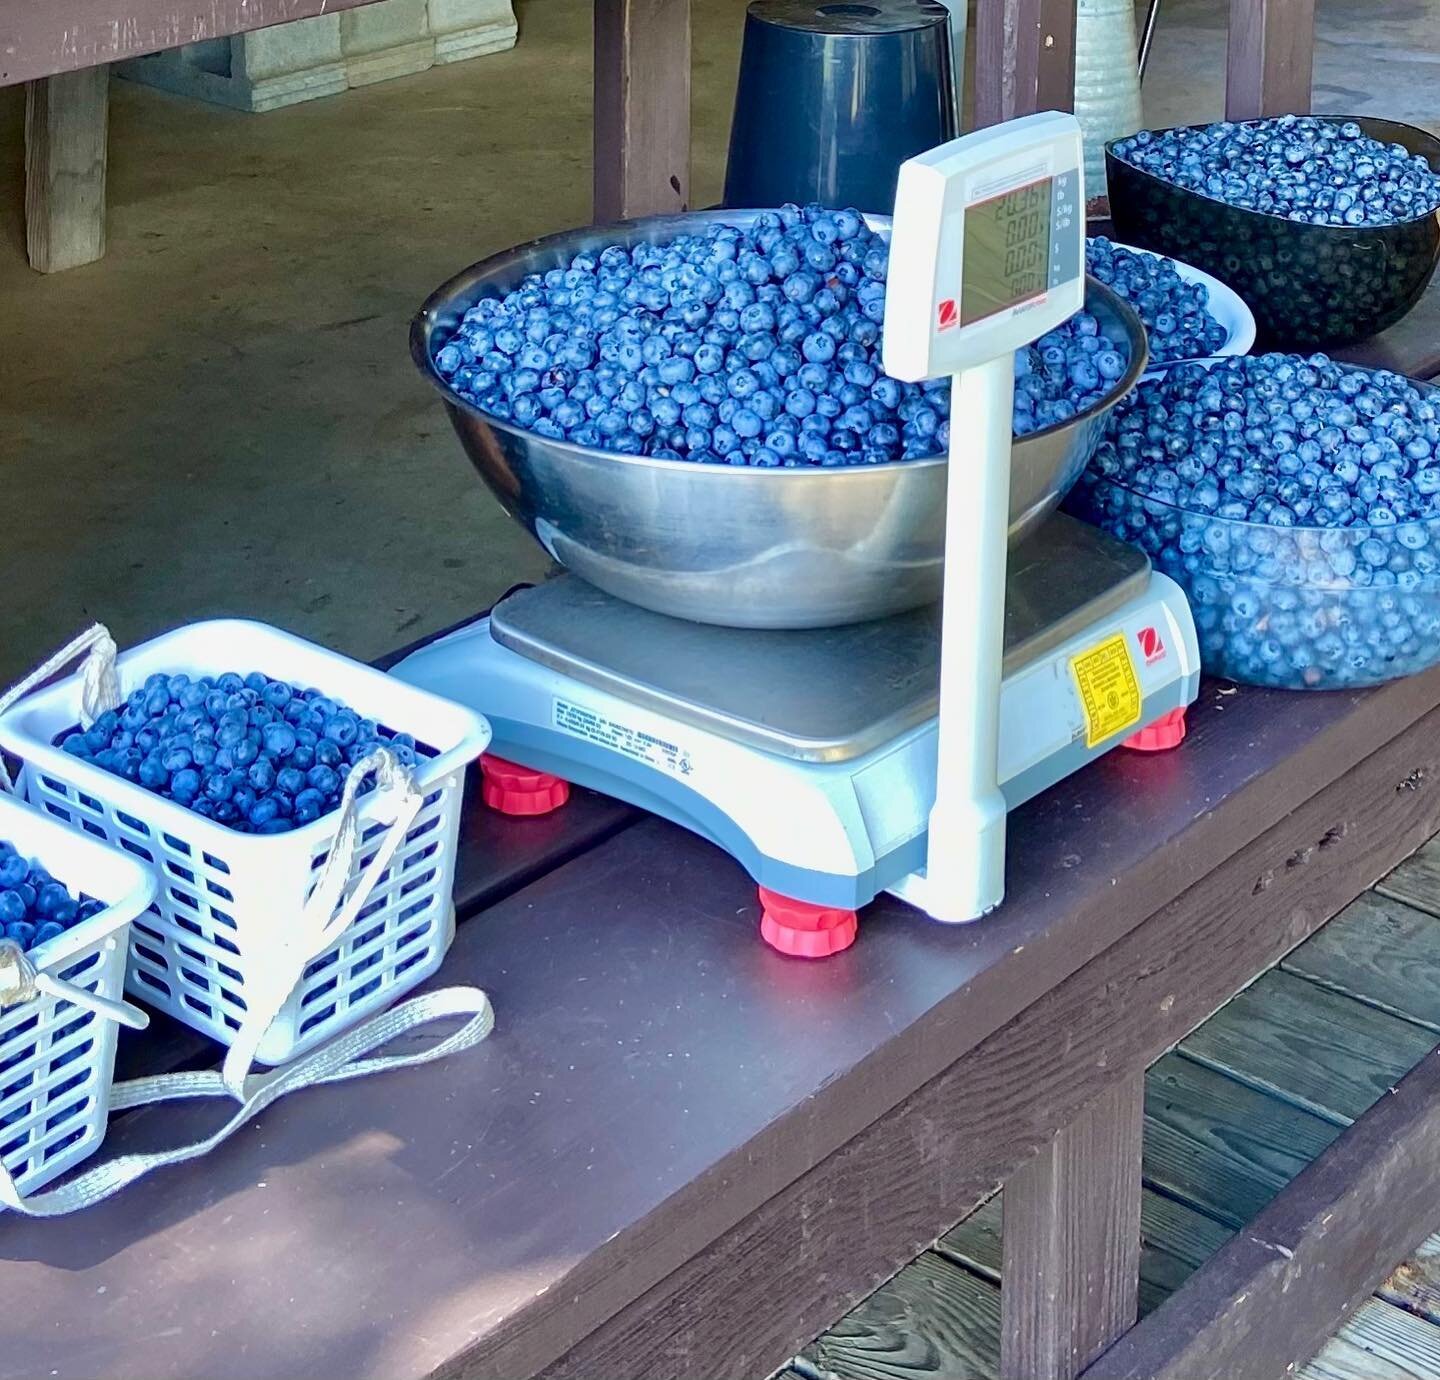 Blueberry picking is finished for the year. What a sweet summer day to wrap up a season of great picking. It was also a perfect day to host our last farm wedding of the year. Thank you for all of your blueberry enthusiasm and support. We look forward